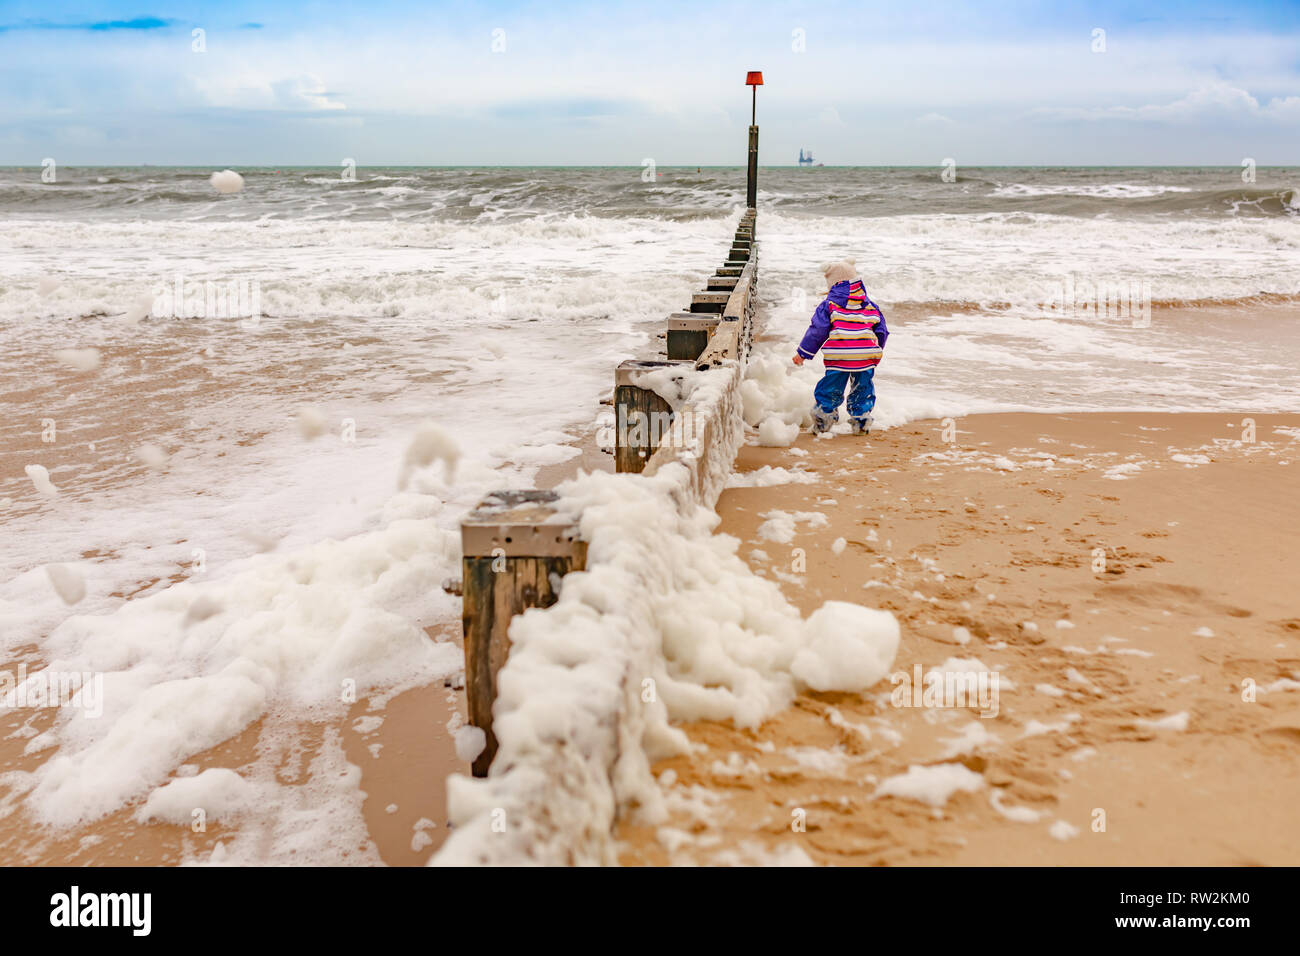 Landscape photograph taken on beach of sea with young child with back to camera playing in sea foam. Bournemouth, Dorset, UK. Stock Photo